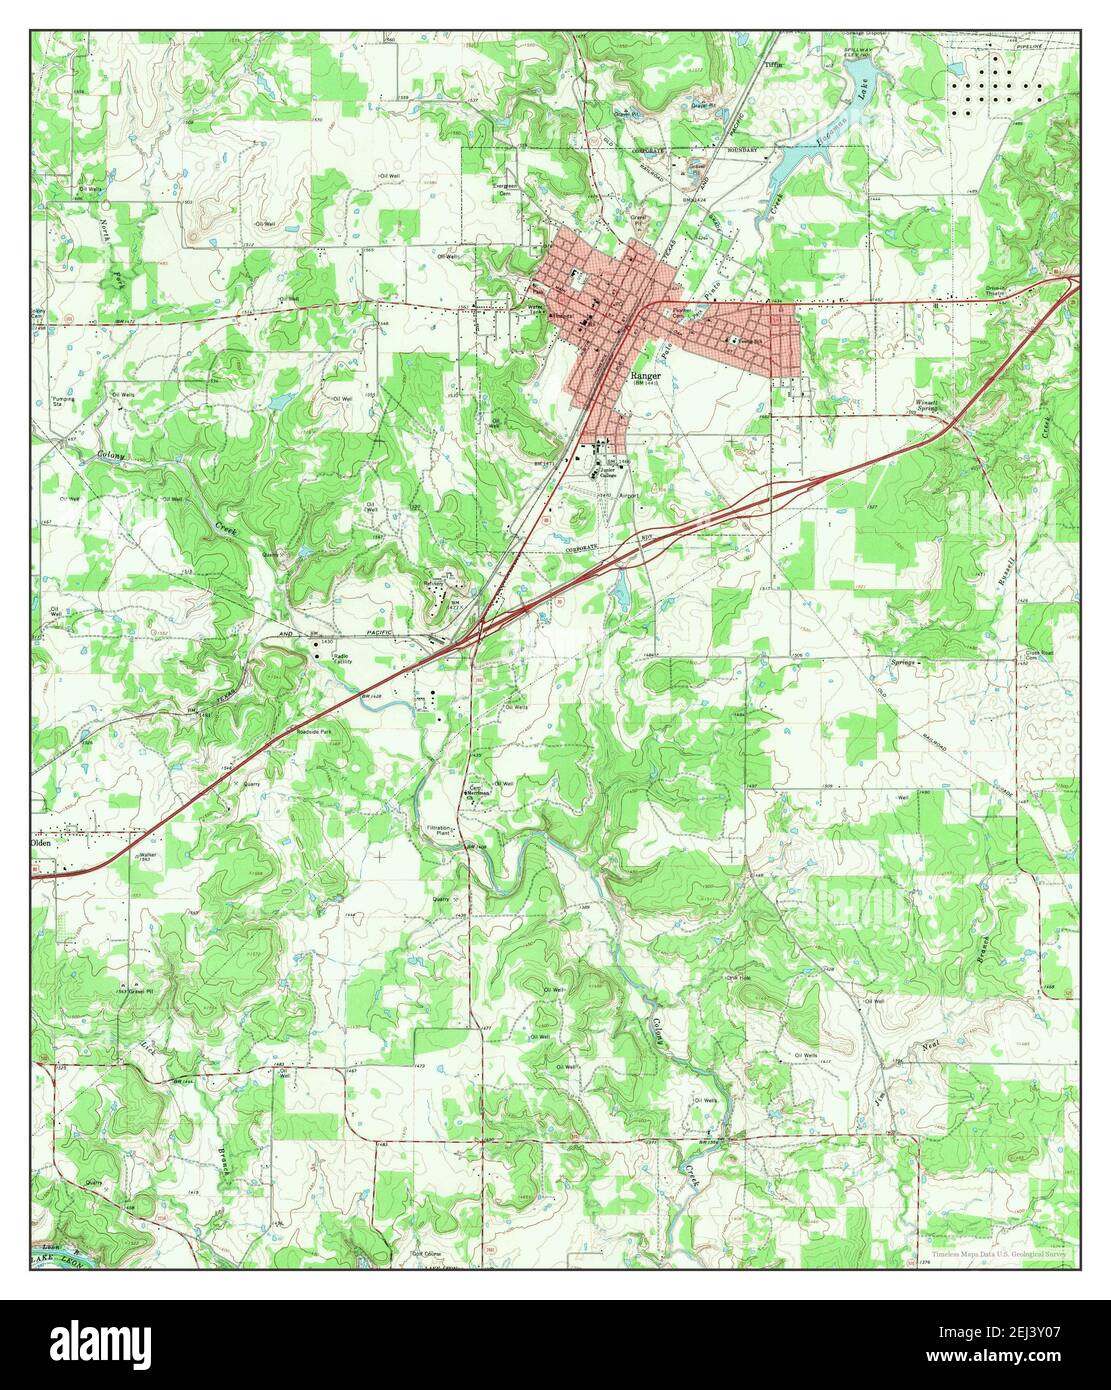 Ranger Texas Map 1966 124000 United States Of America By Timeless Maps Data Us Geological Survey 2EJ3Y07 